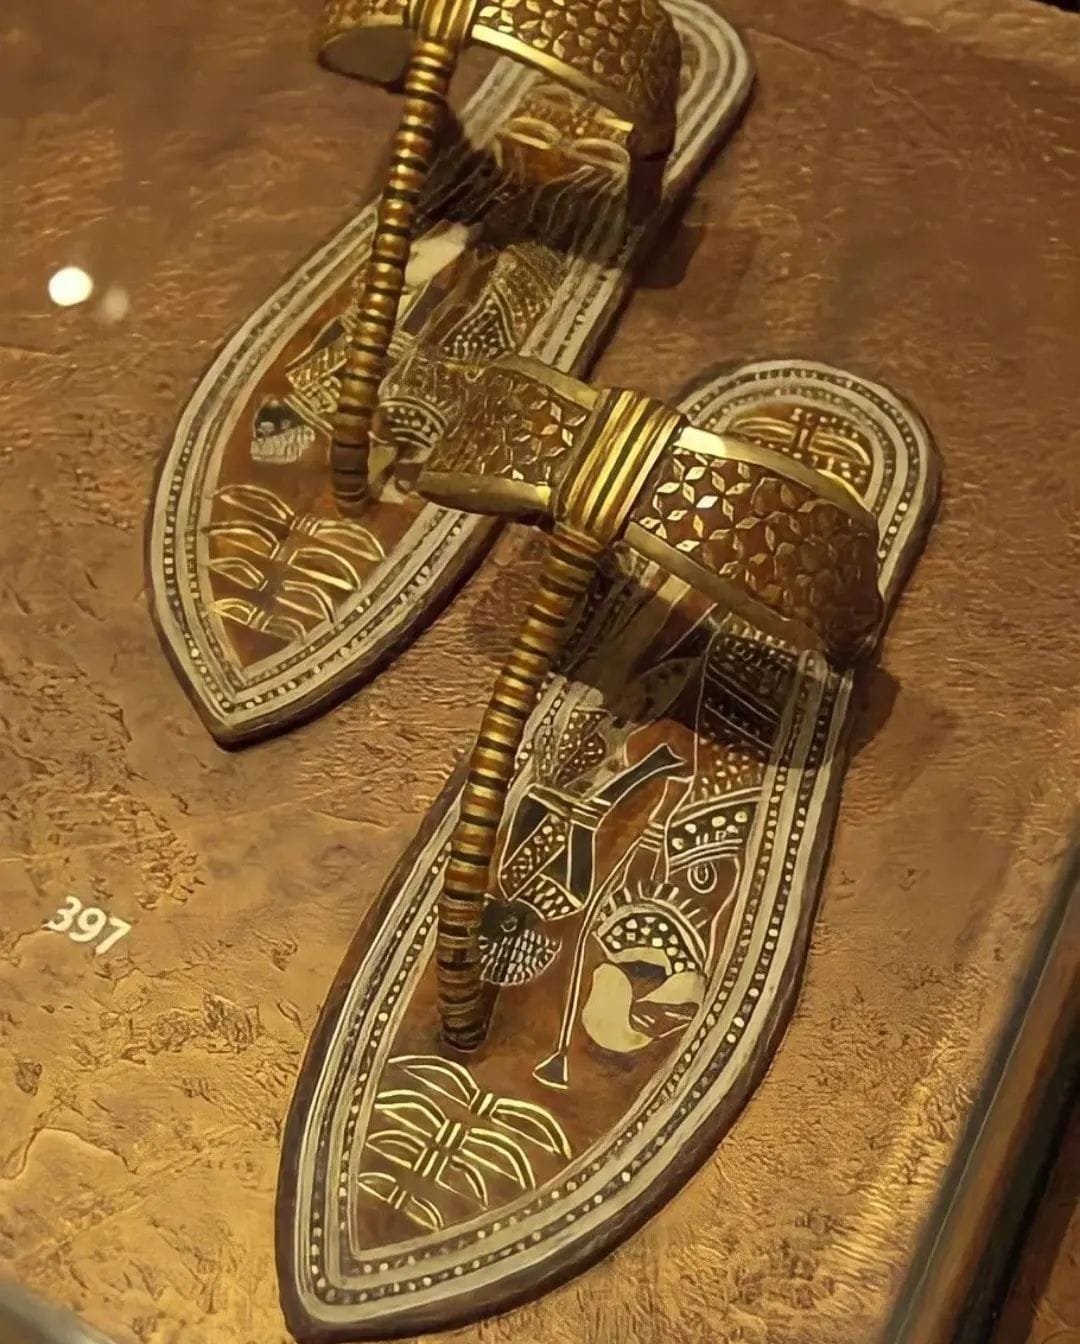 3300-year-old sandals of the Egyptian king Tutankhamun - Wonders of the  Past 🏺✨ - Quora